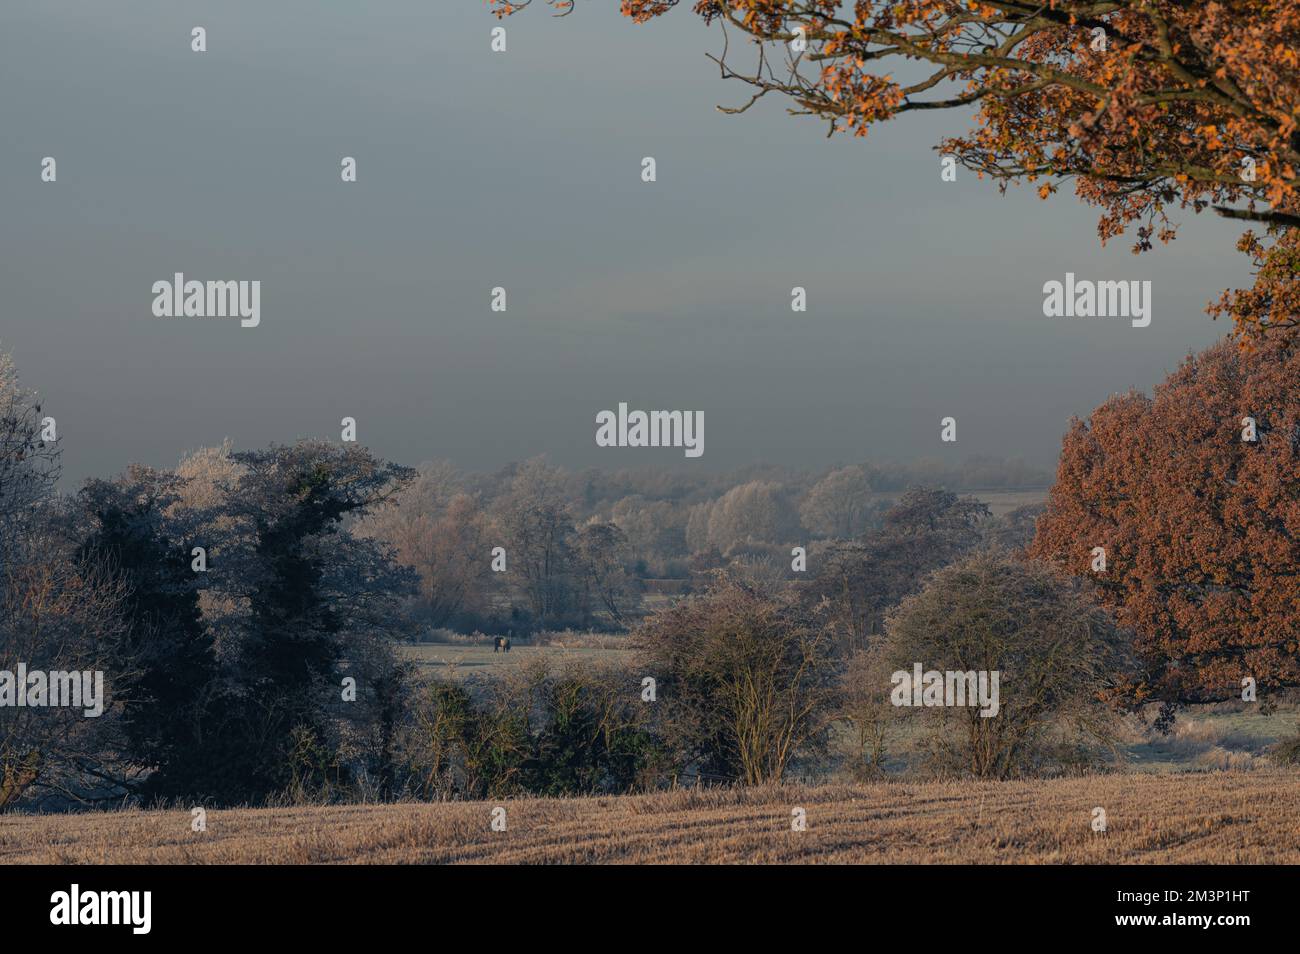 Autumn meets winter. Warm and cool tones. West Bergholt landscape, views. Essex countryside in December. Feathery frost. Stock Photo